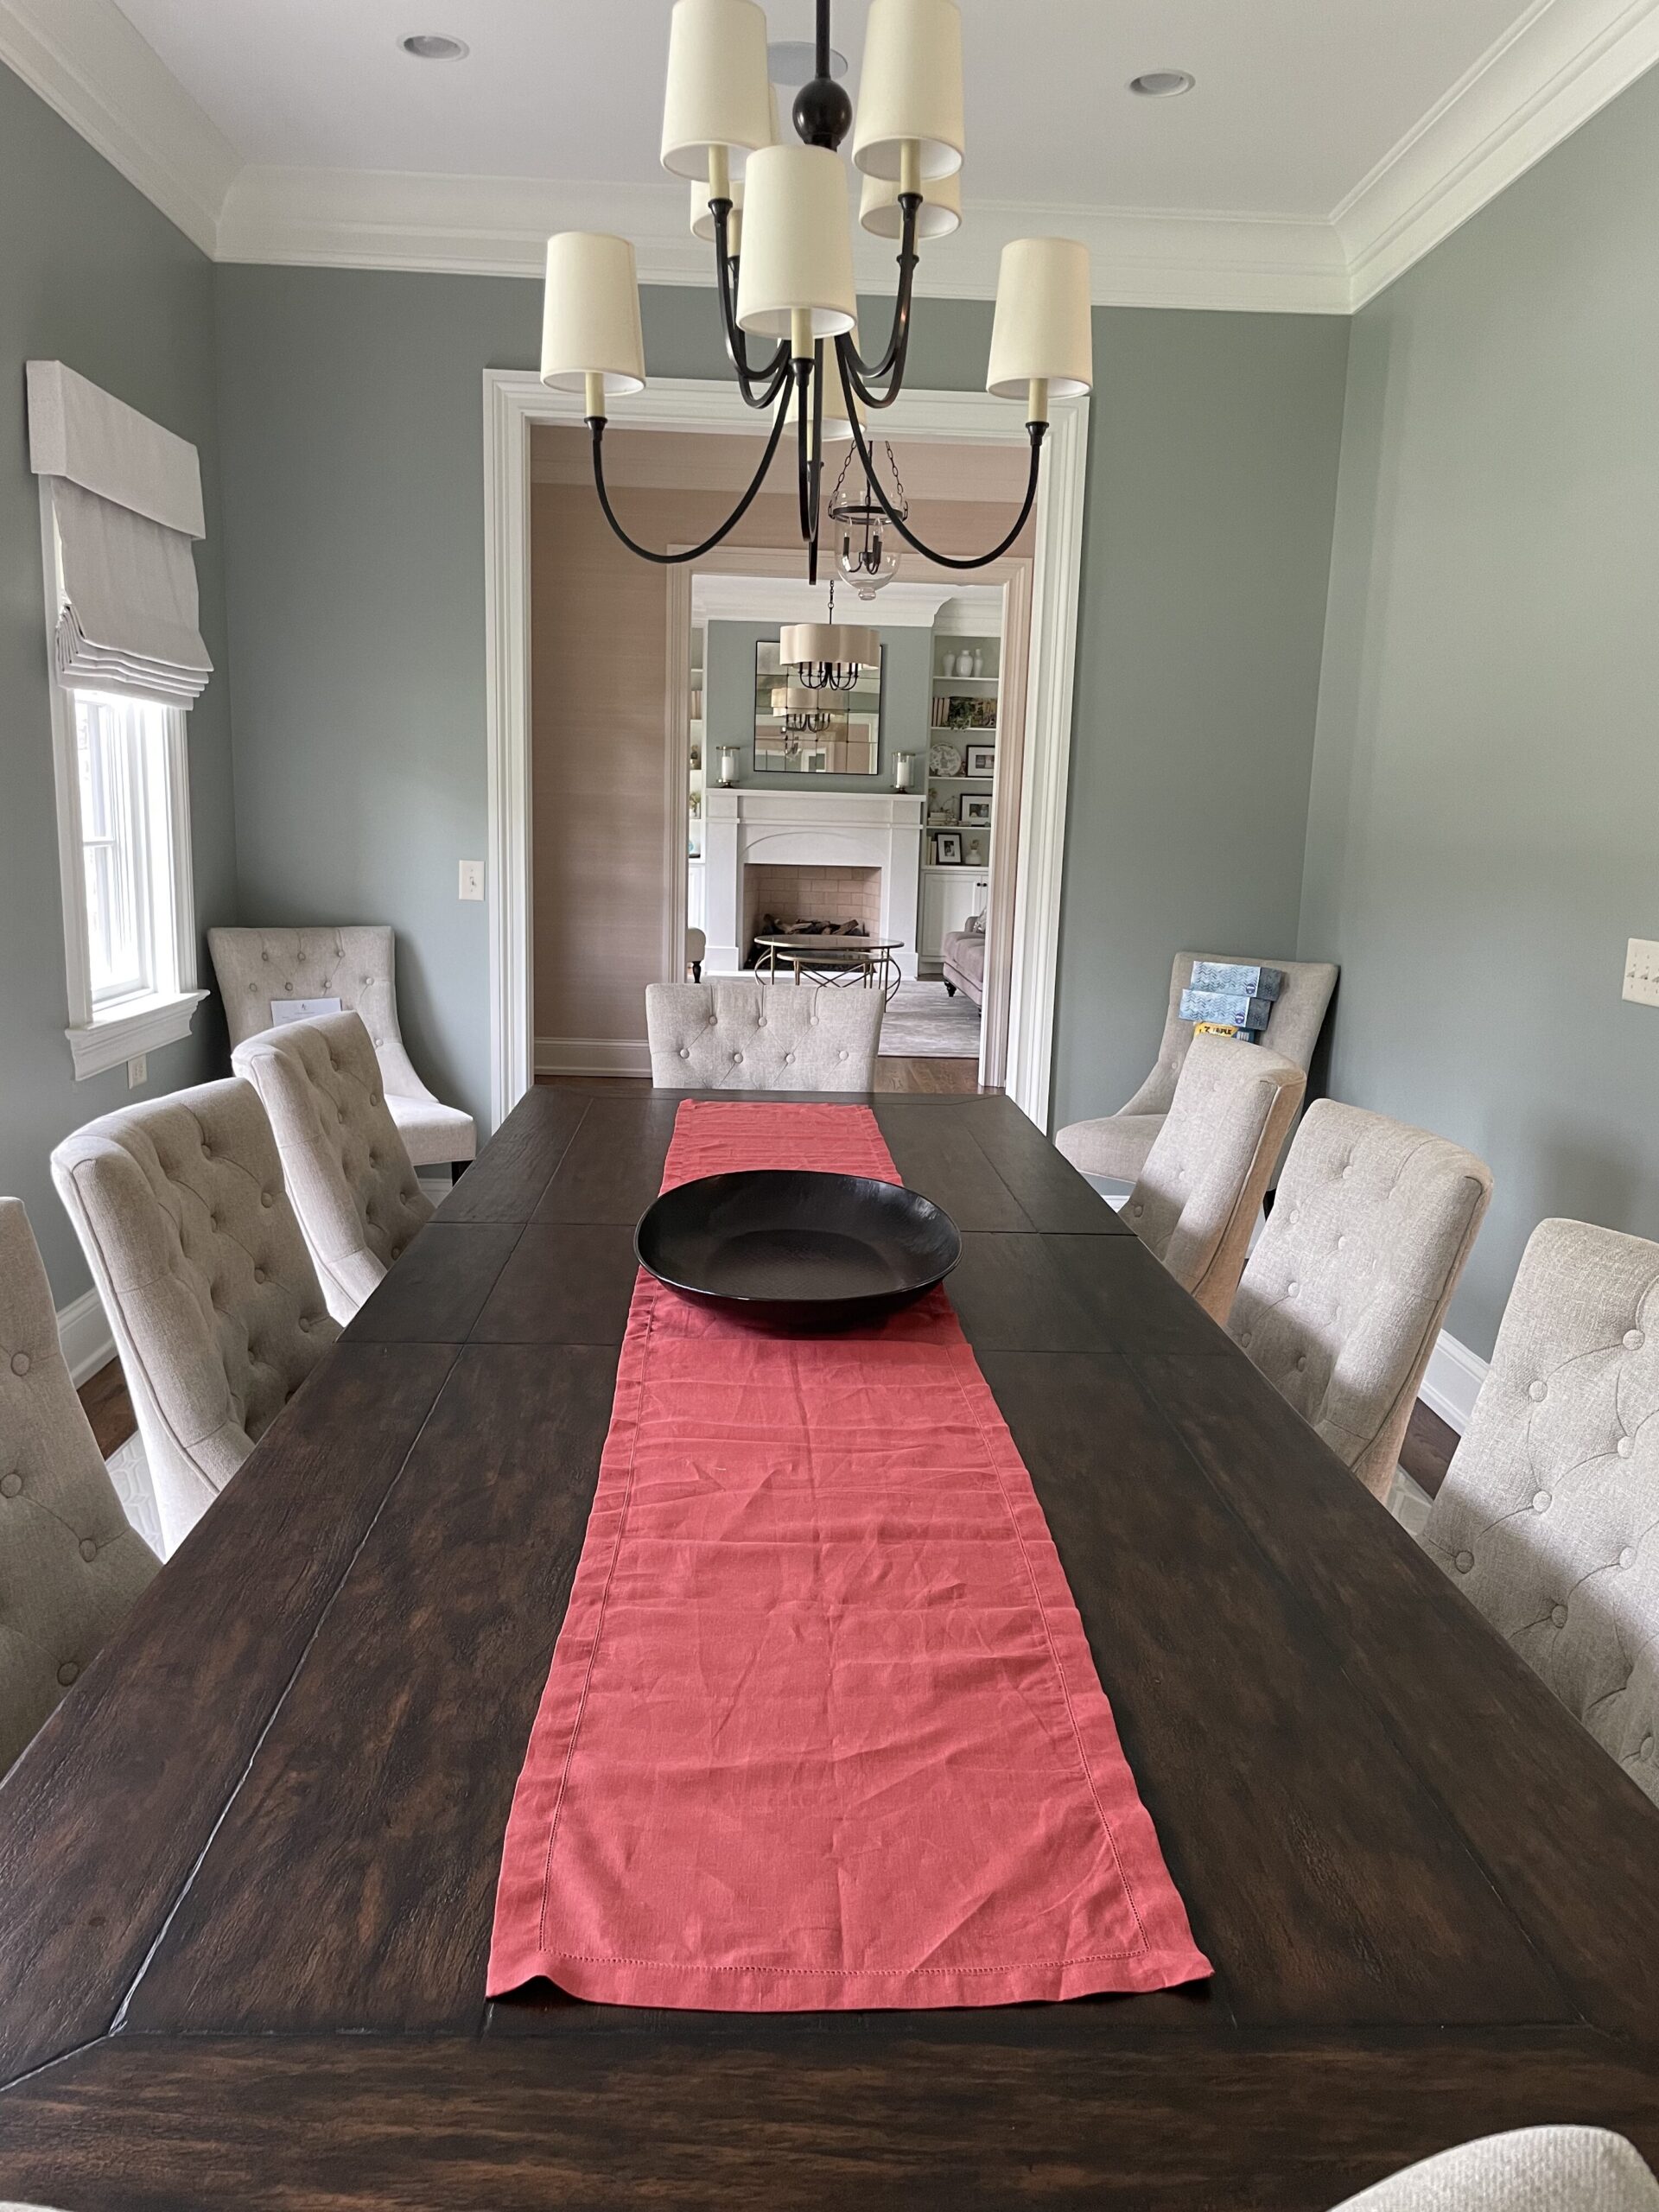 This house extension allows for a larger dining table which is the perfect home improvement from a Nashville Home Builder and Residential Contractor